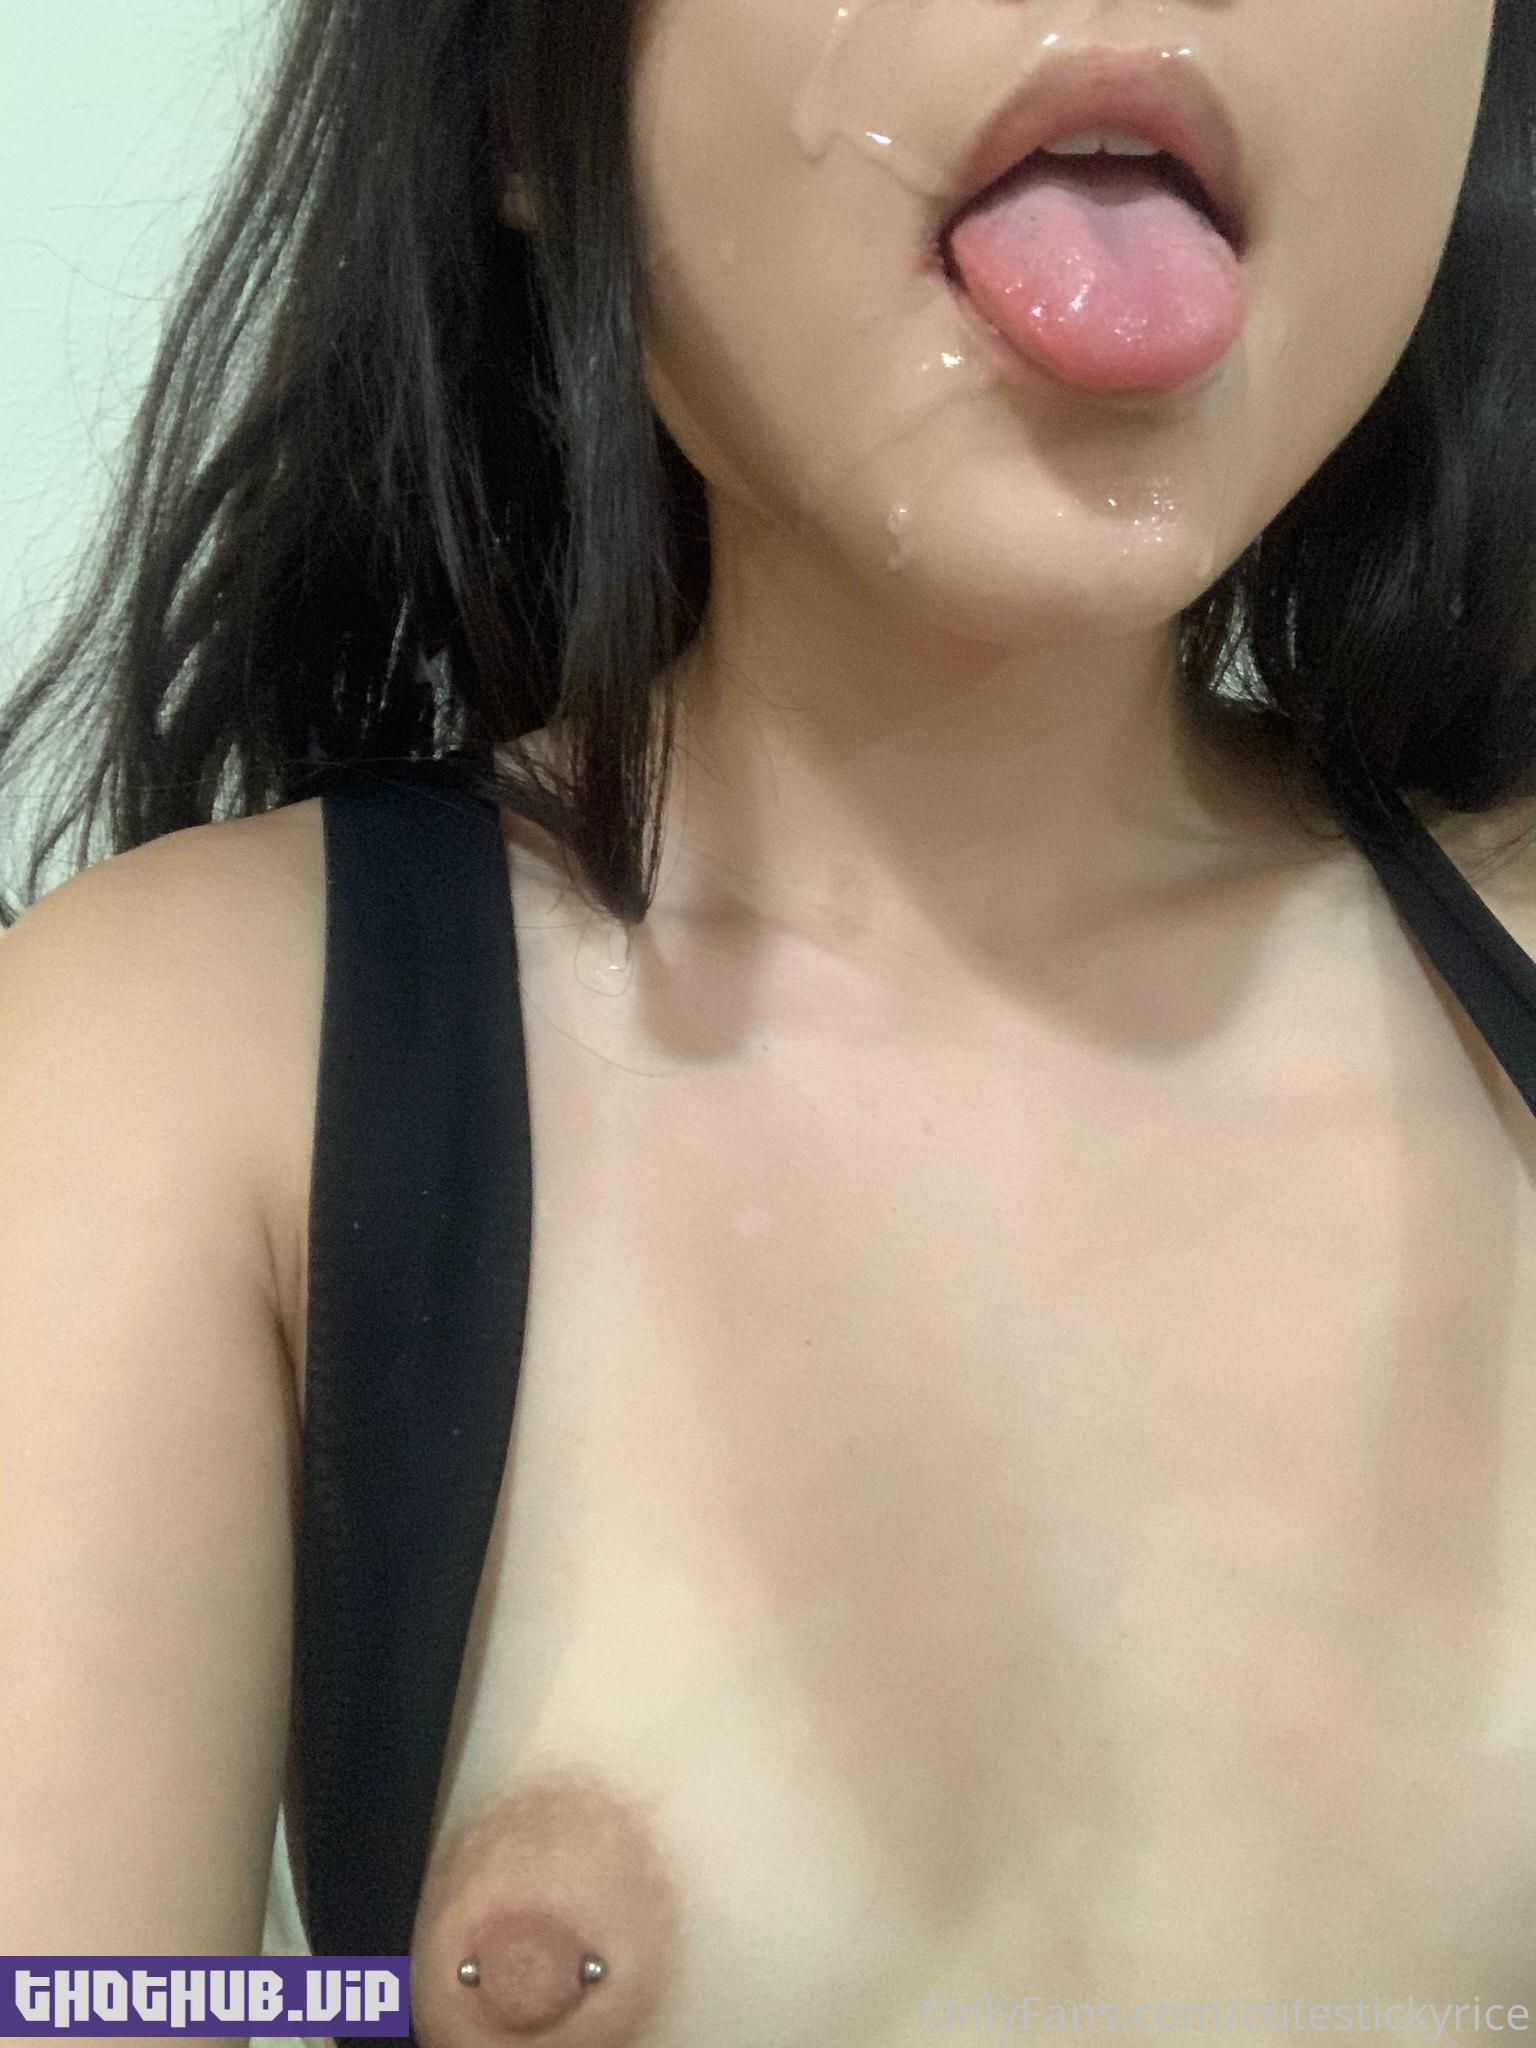 1663083894 167 Cute Rice Onlyfans